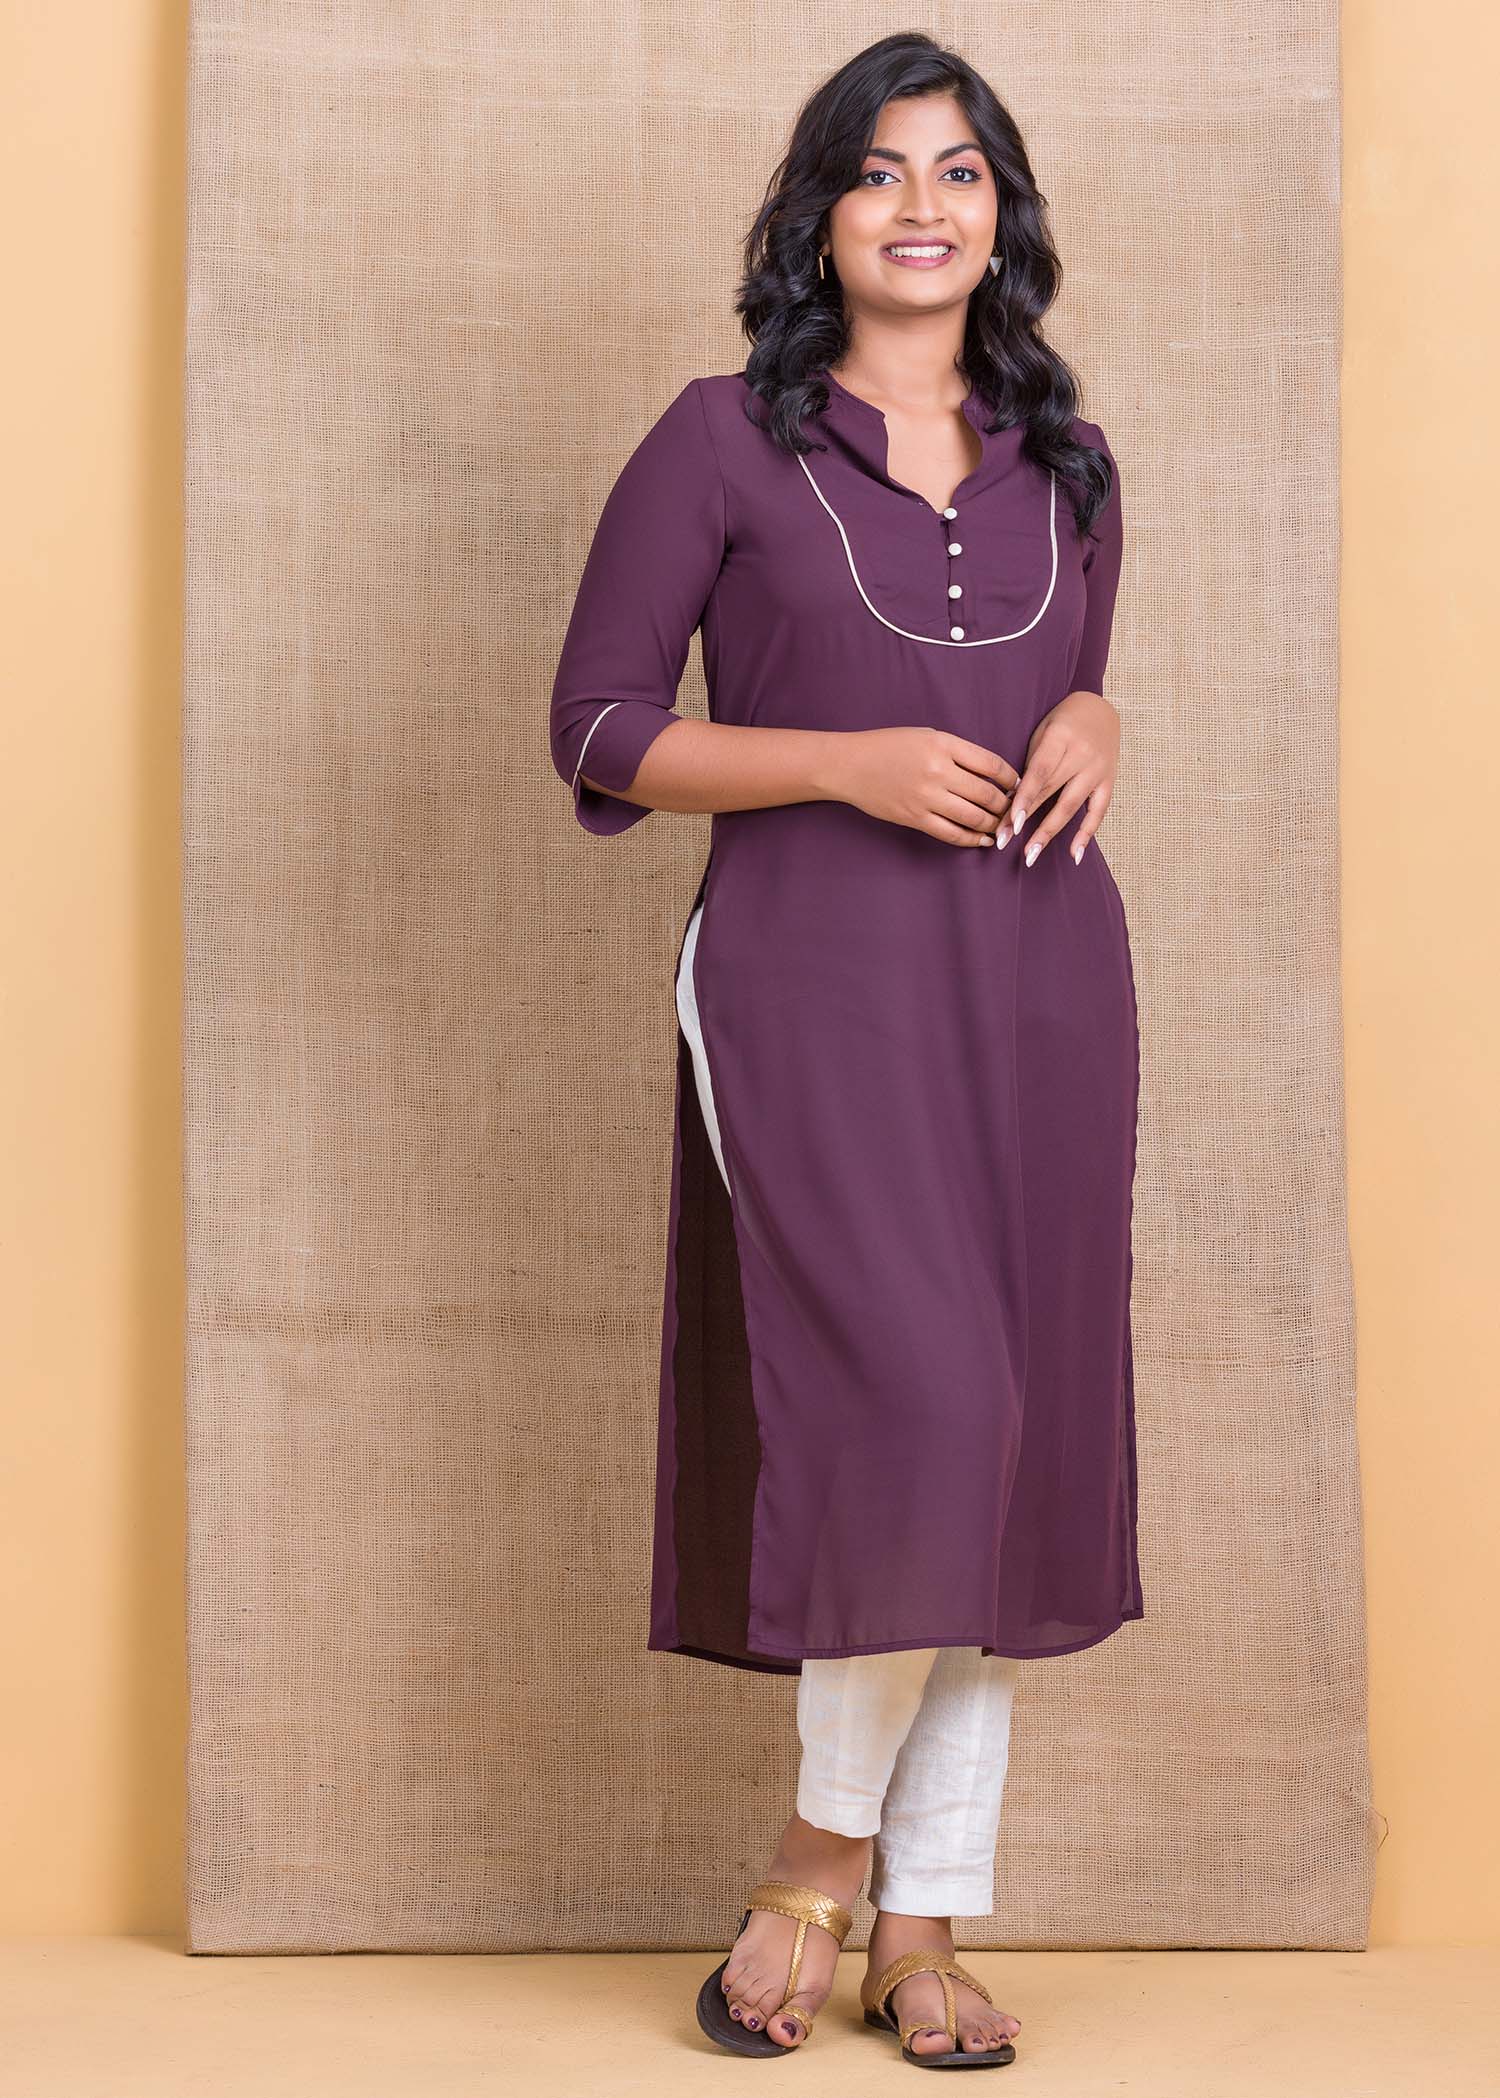 Kurtha top with contrast piping and button detail